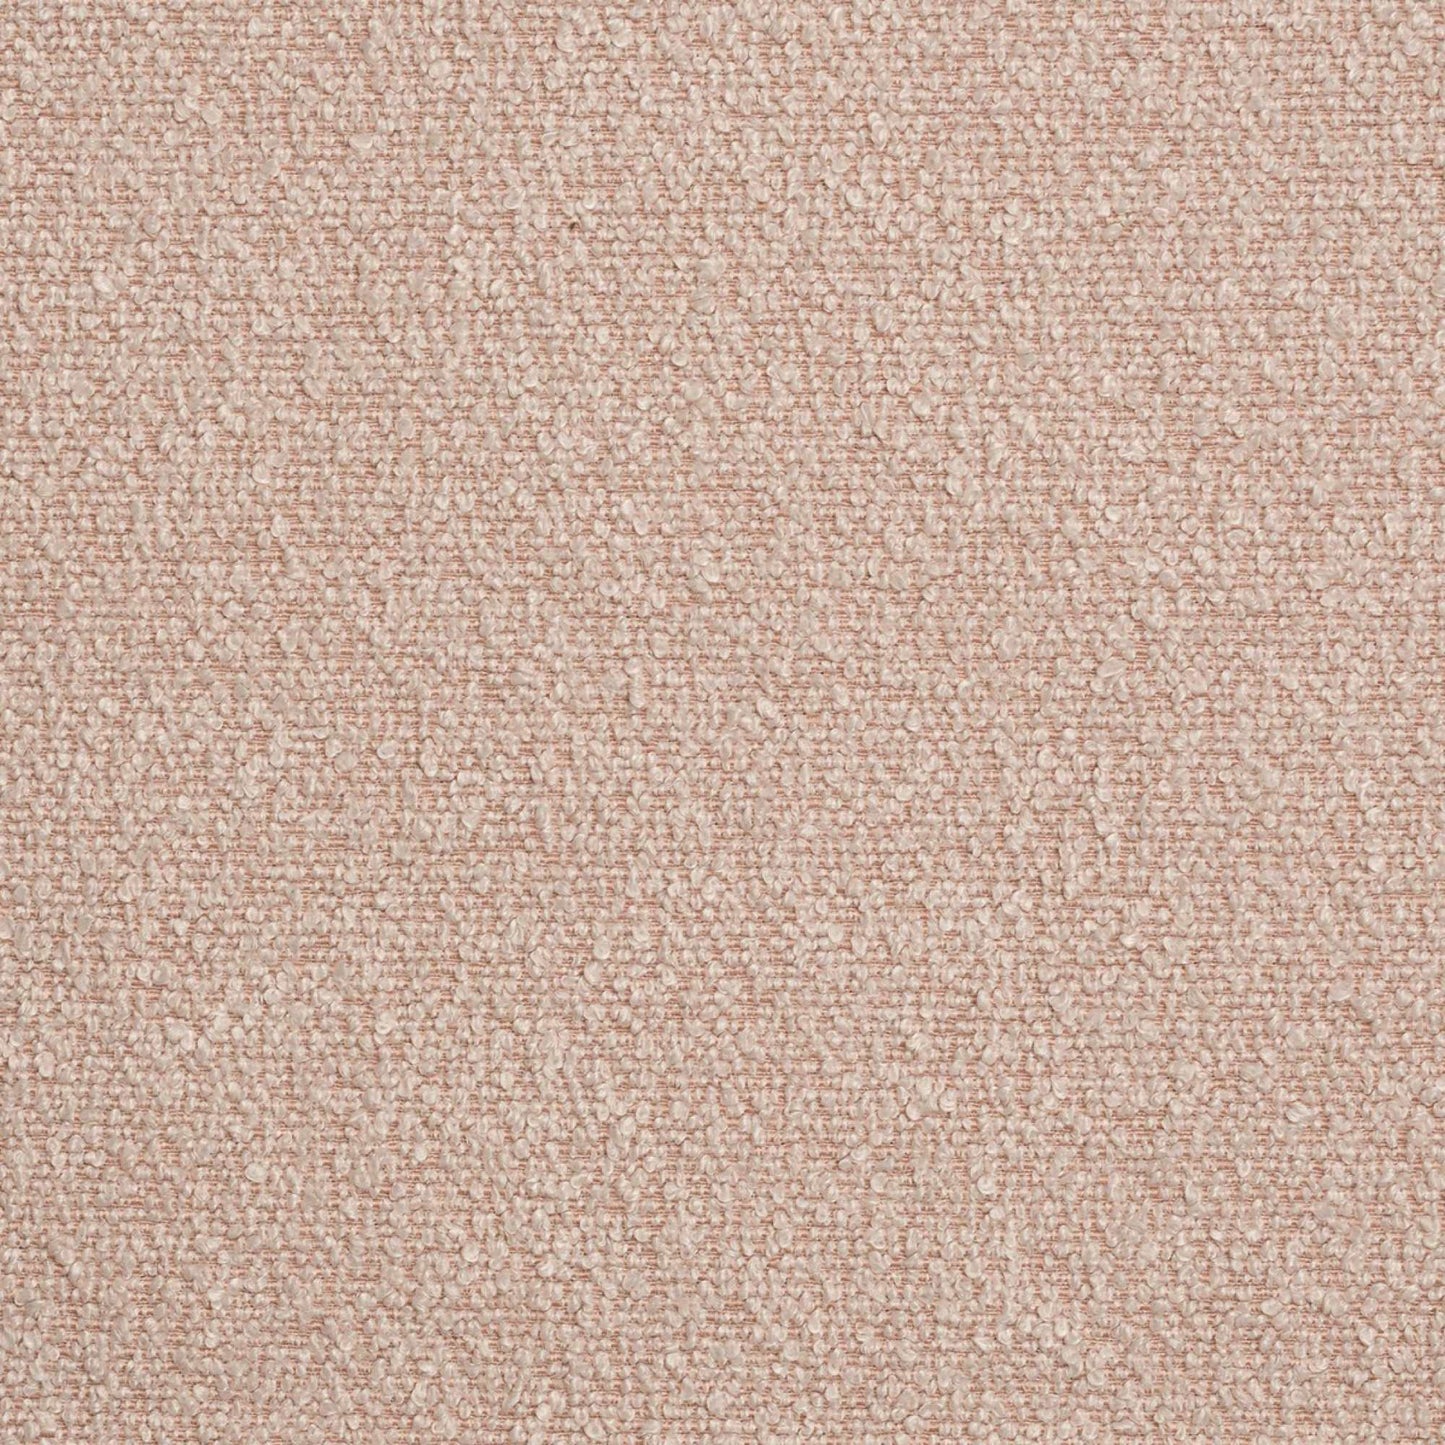 FONTAINE NUDE FABRIC SAMPLE | MID RANGE COLLECTION